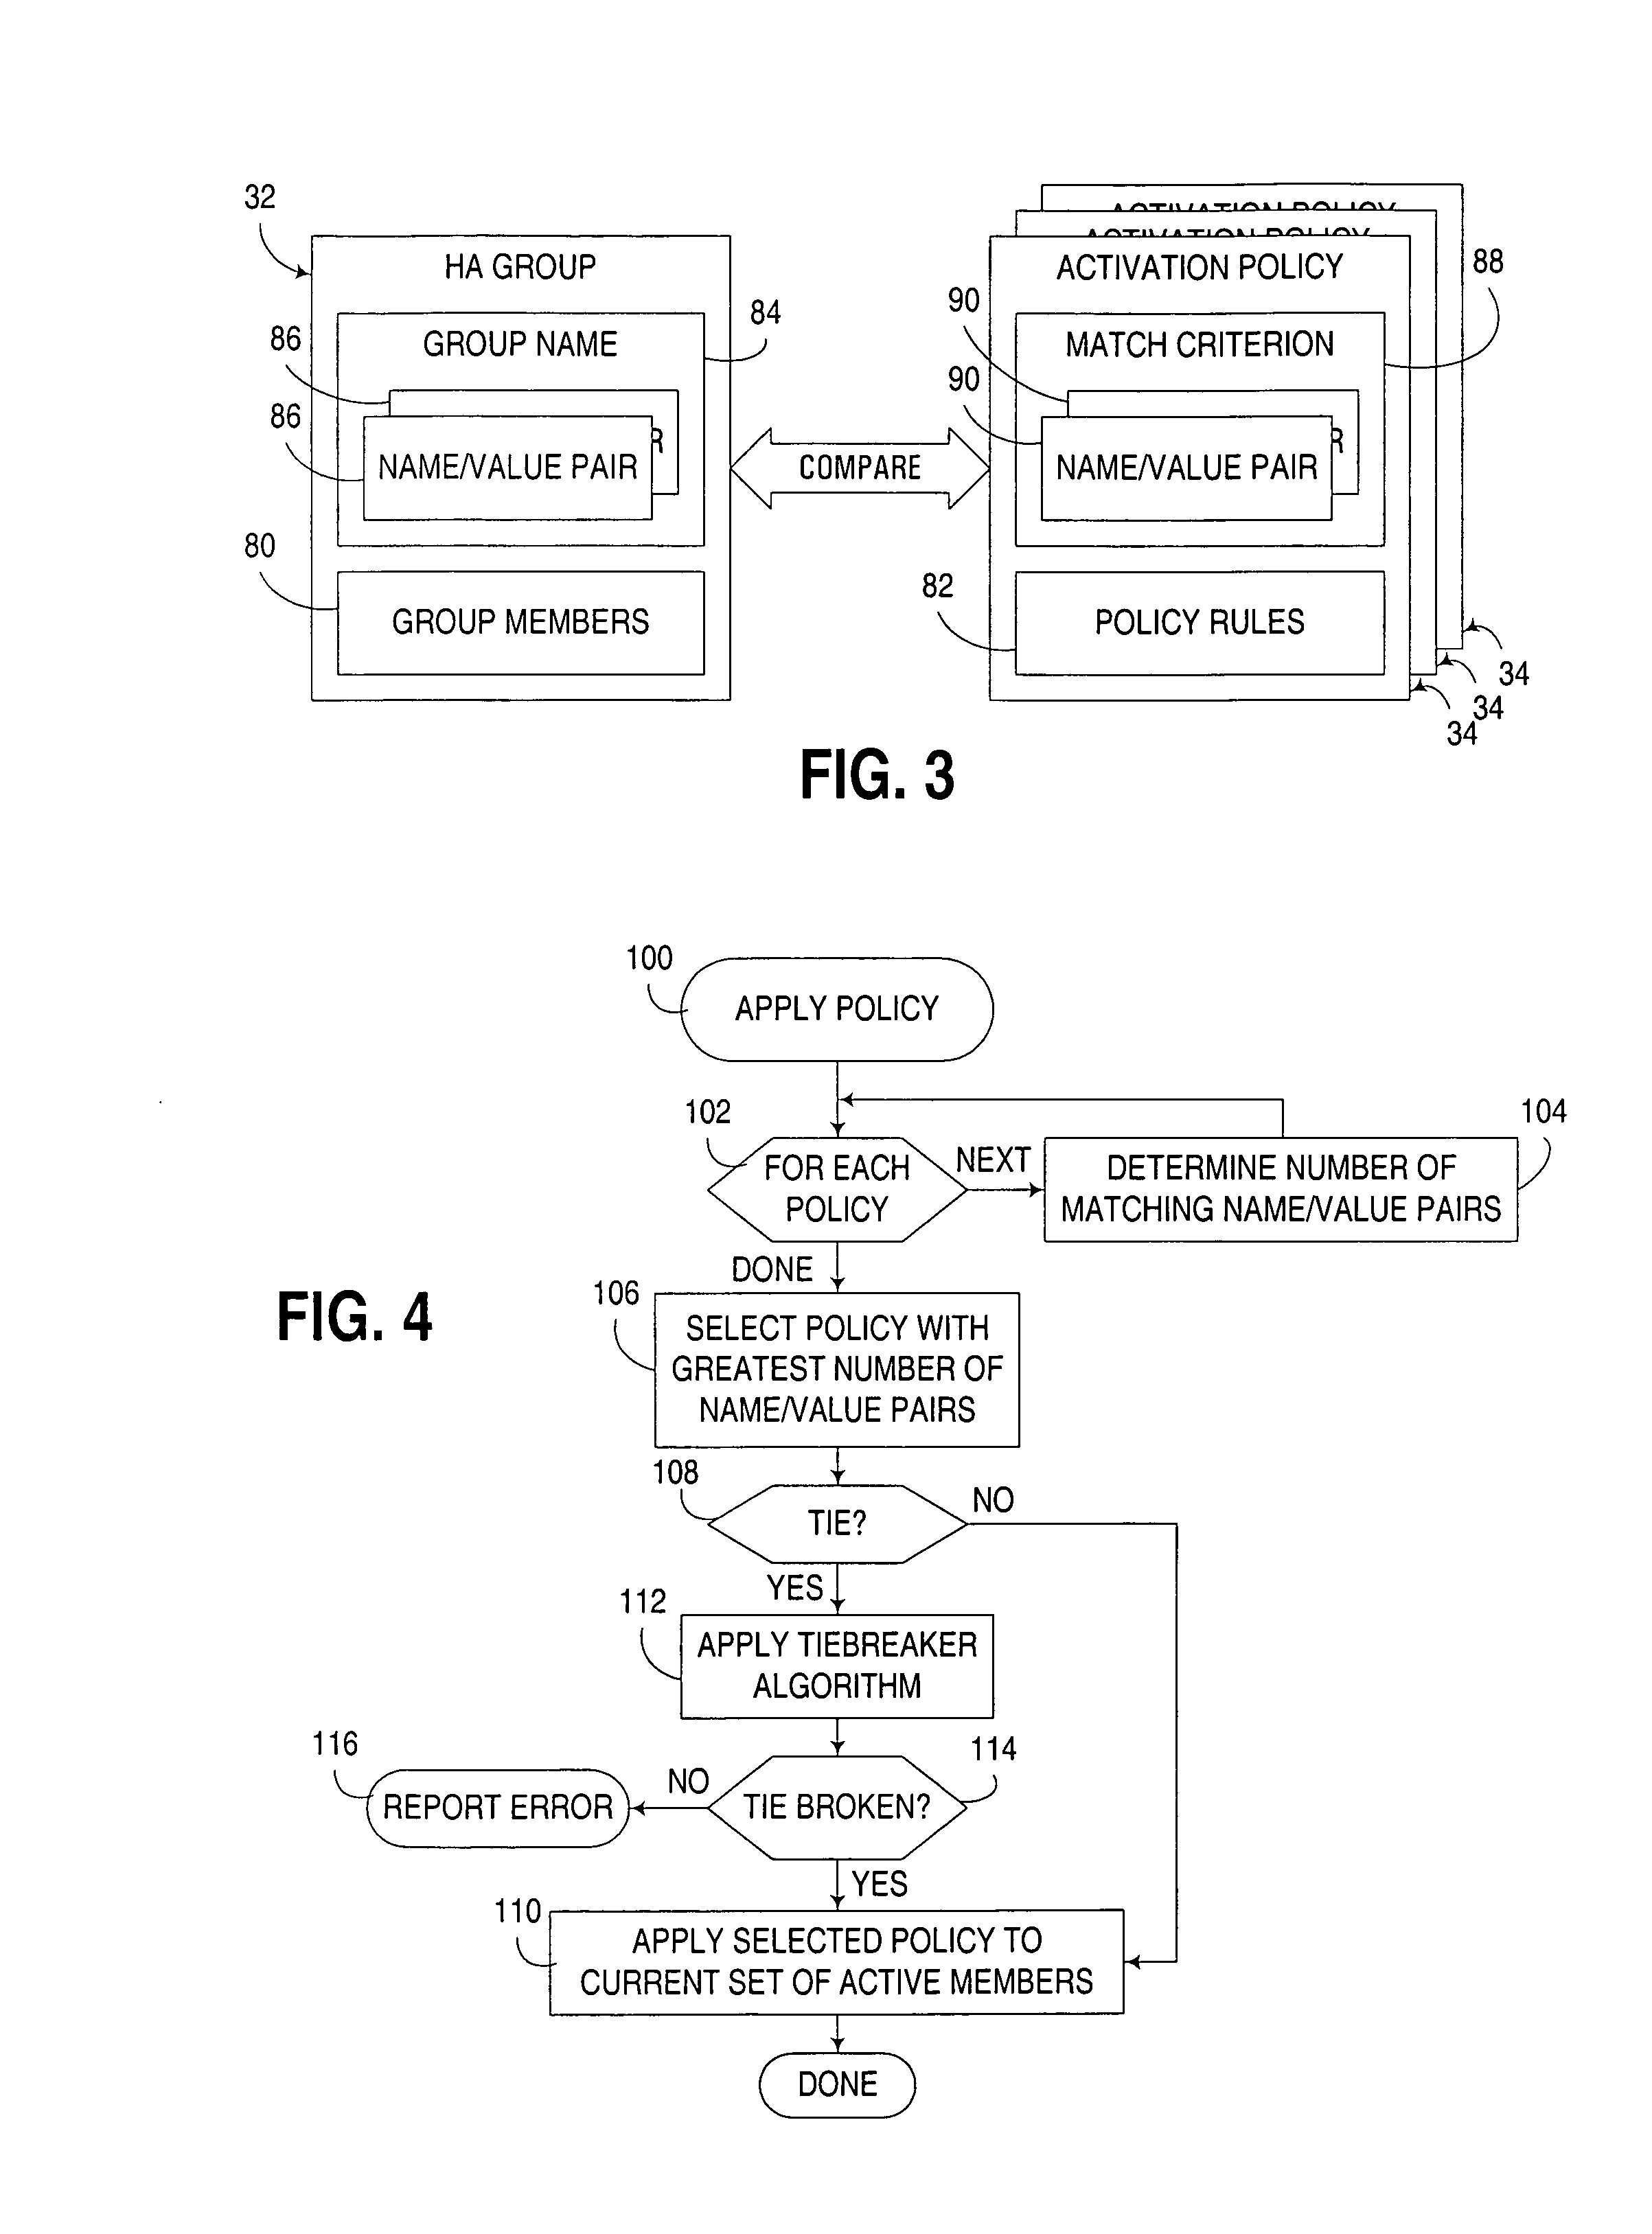 Application of attribute-set policies to managed resources in a distributed computing system